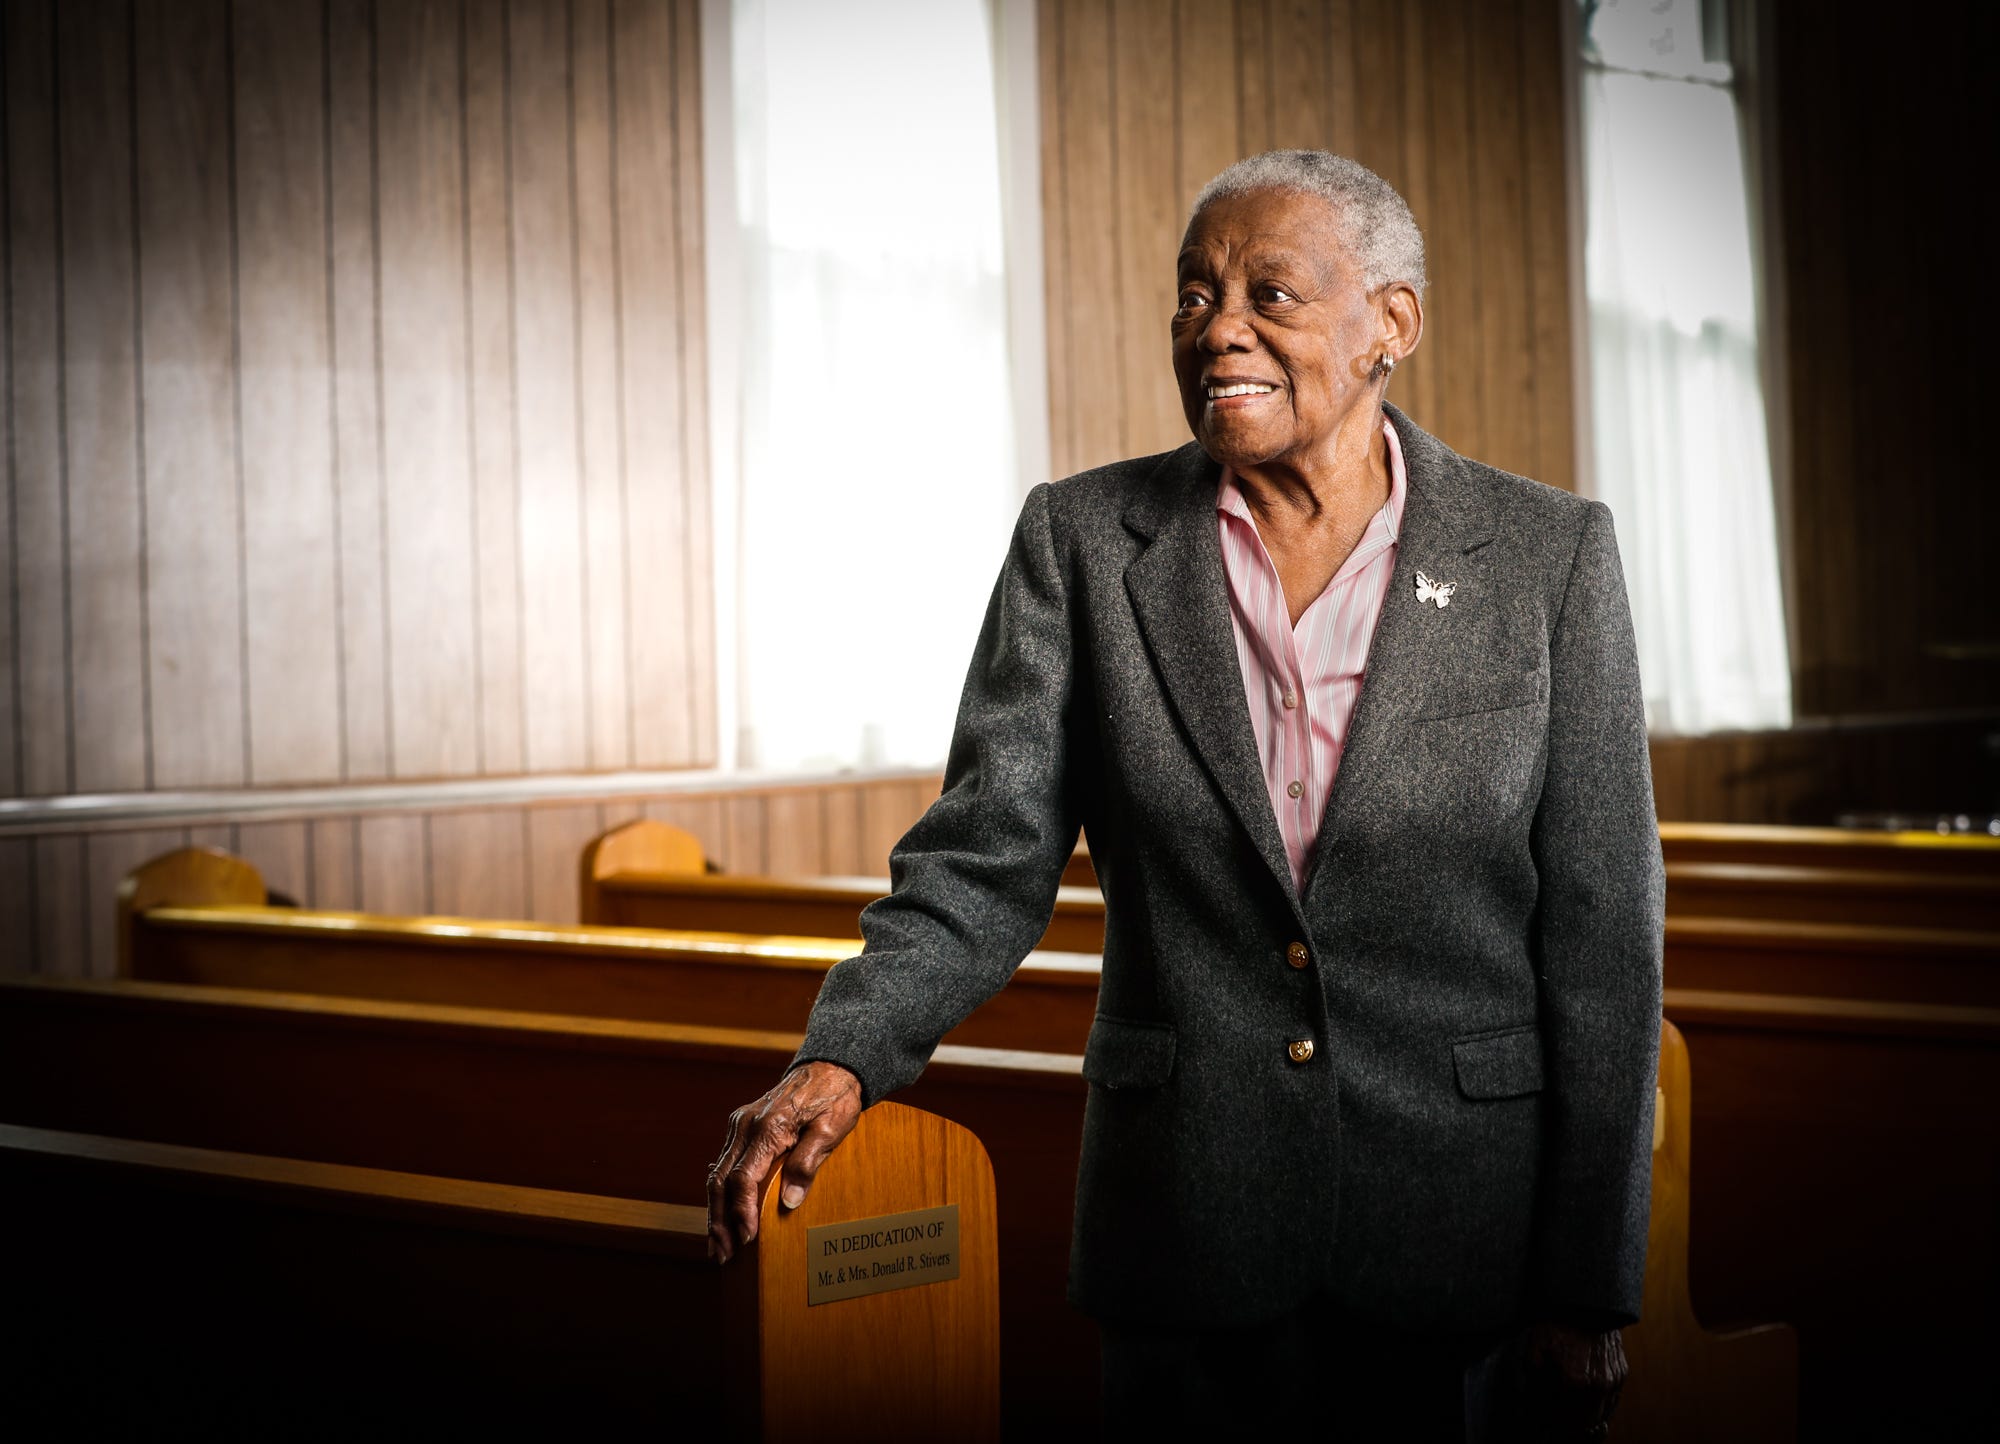 Flinora Frazier, the grand daughter of Penick Chapel AME Zion Church founder, Rev. Sidney Penick, is photographed in the church which was founded in 1889, on Tuesday, March 1, 2022, in the Norwood neighborhood of Indianapolis. The Norwood neighborhood was a Freetown founded and built by Civil War veterans in the 1860s, and 
Frazier is a direct descendant of those founders. 